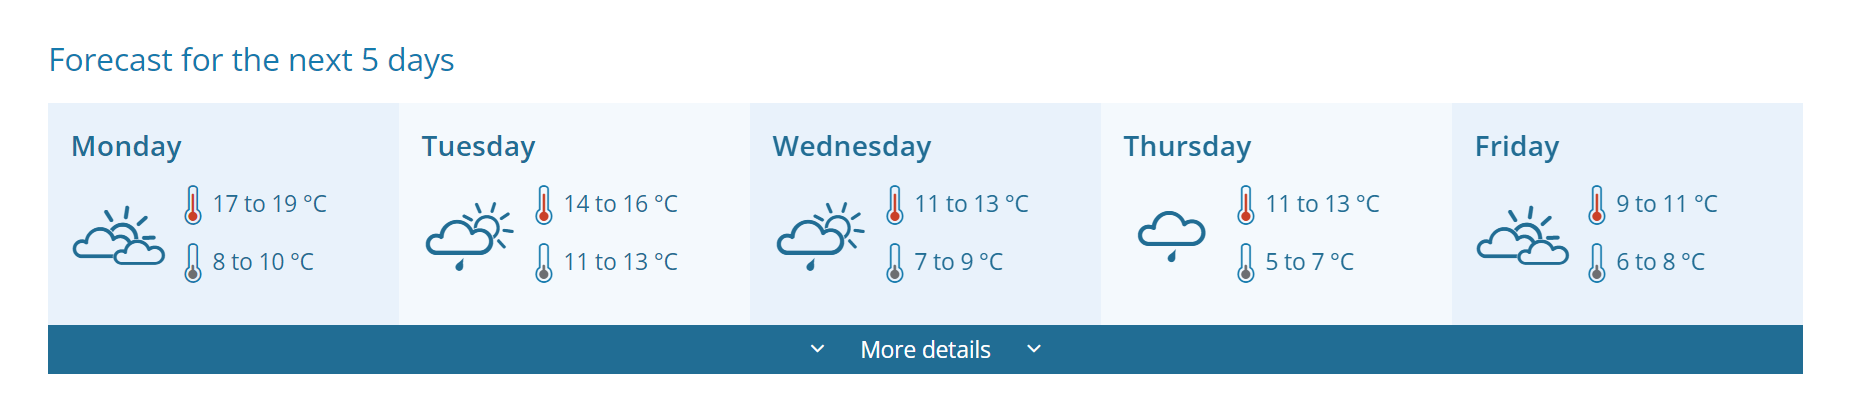 Warm autumn continues in Luxembourg next week